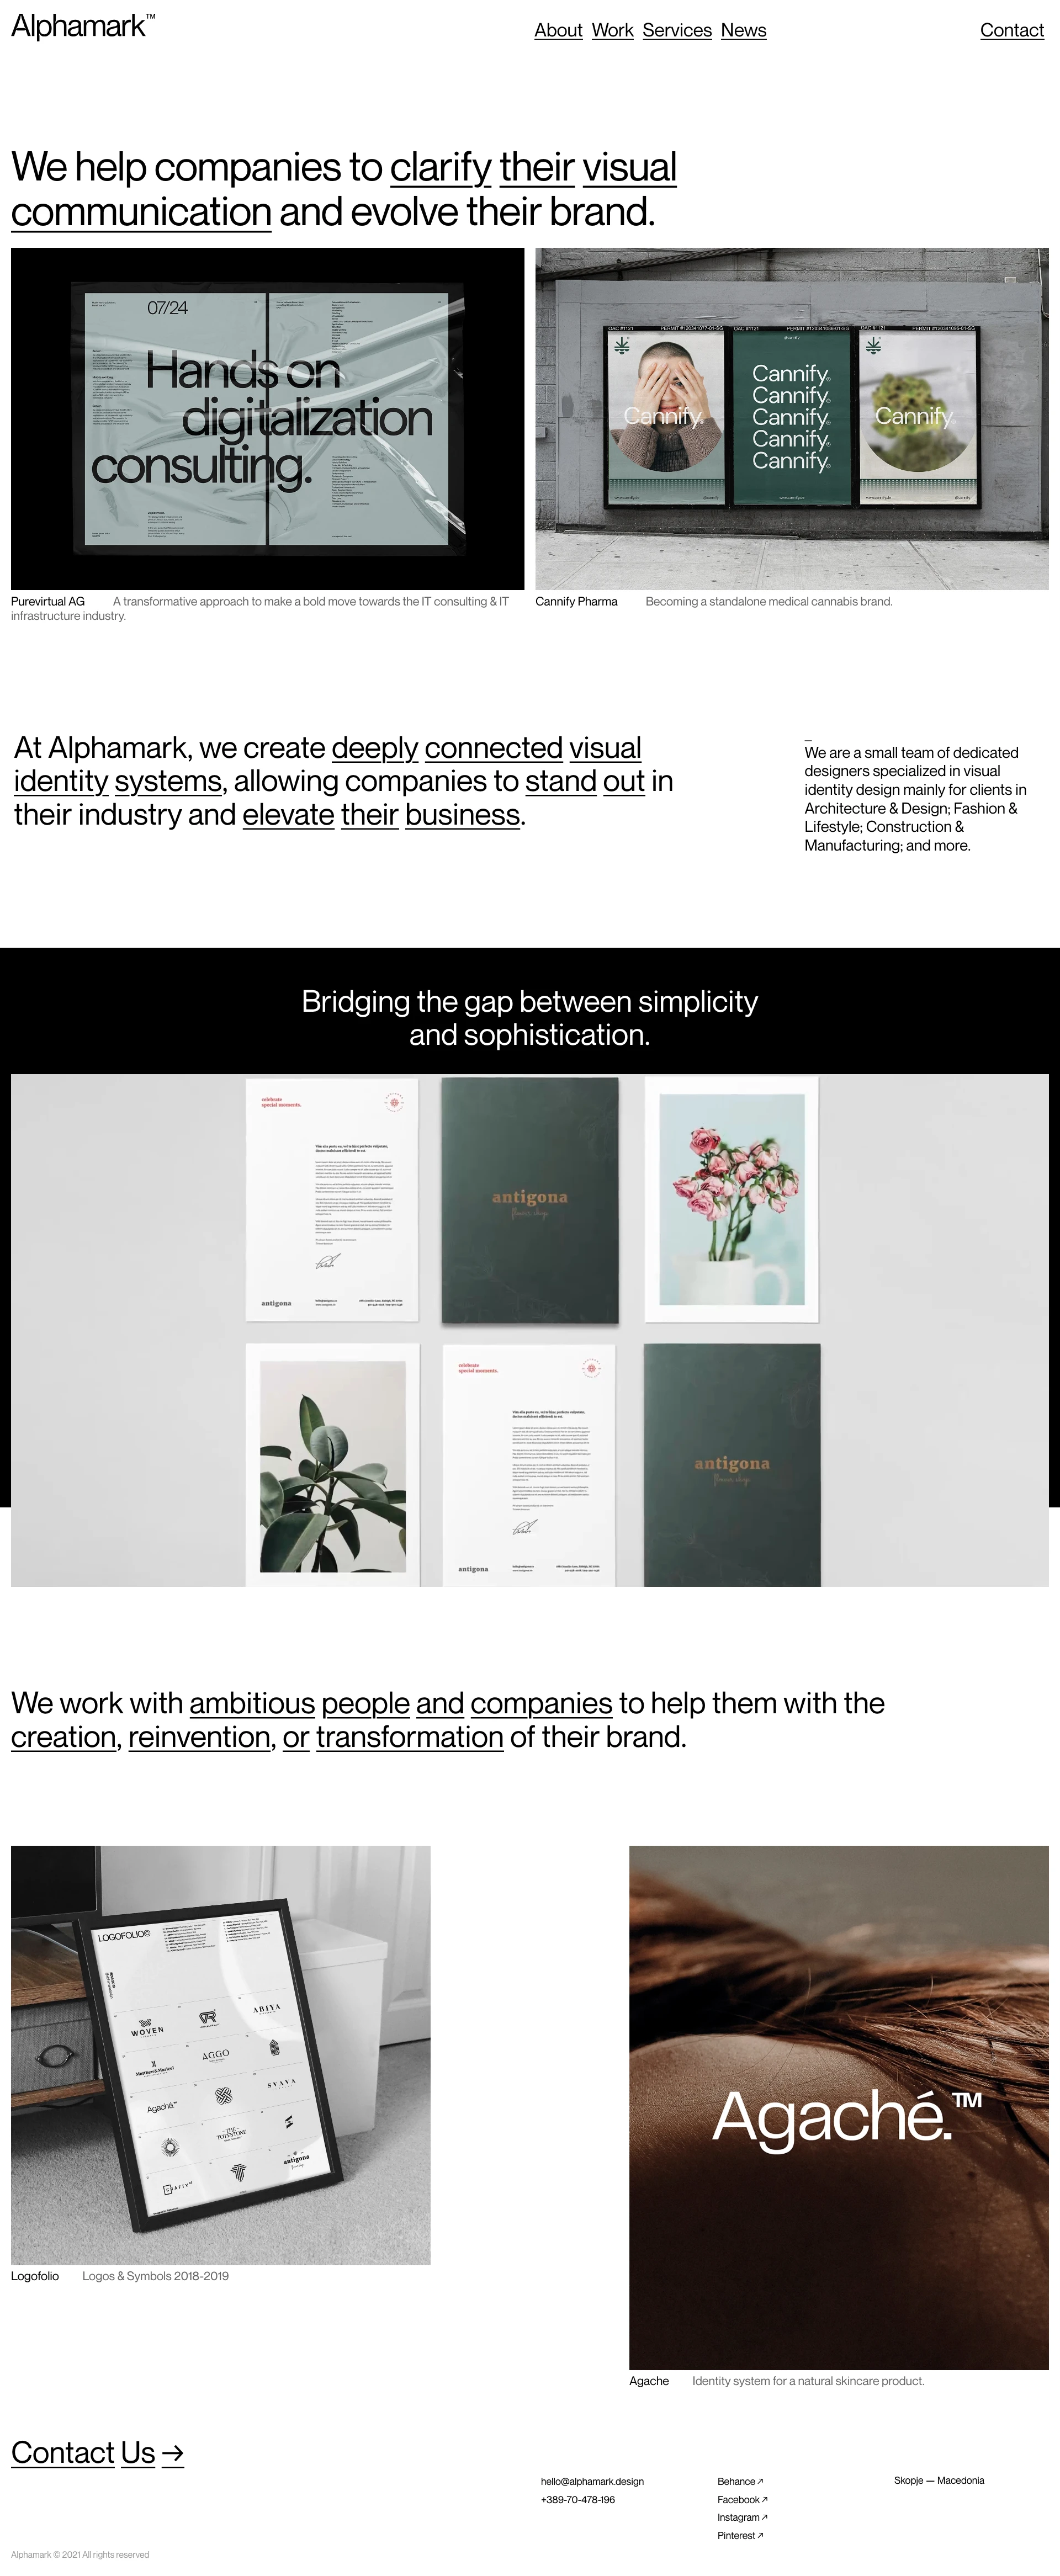 Alphamark Landing Page Example: Alphamark is a branding studio focused on helping companies to clarify their visual communication and evolve their brand.